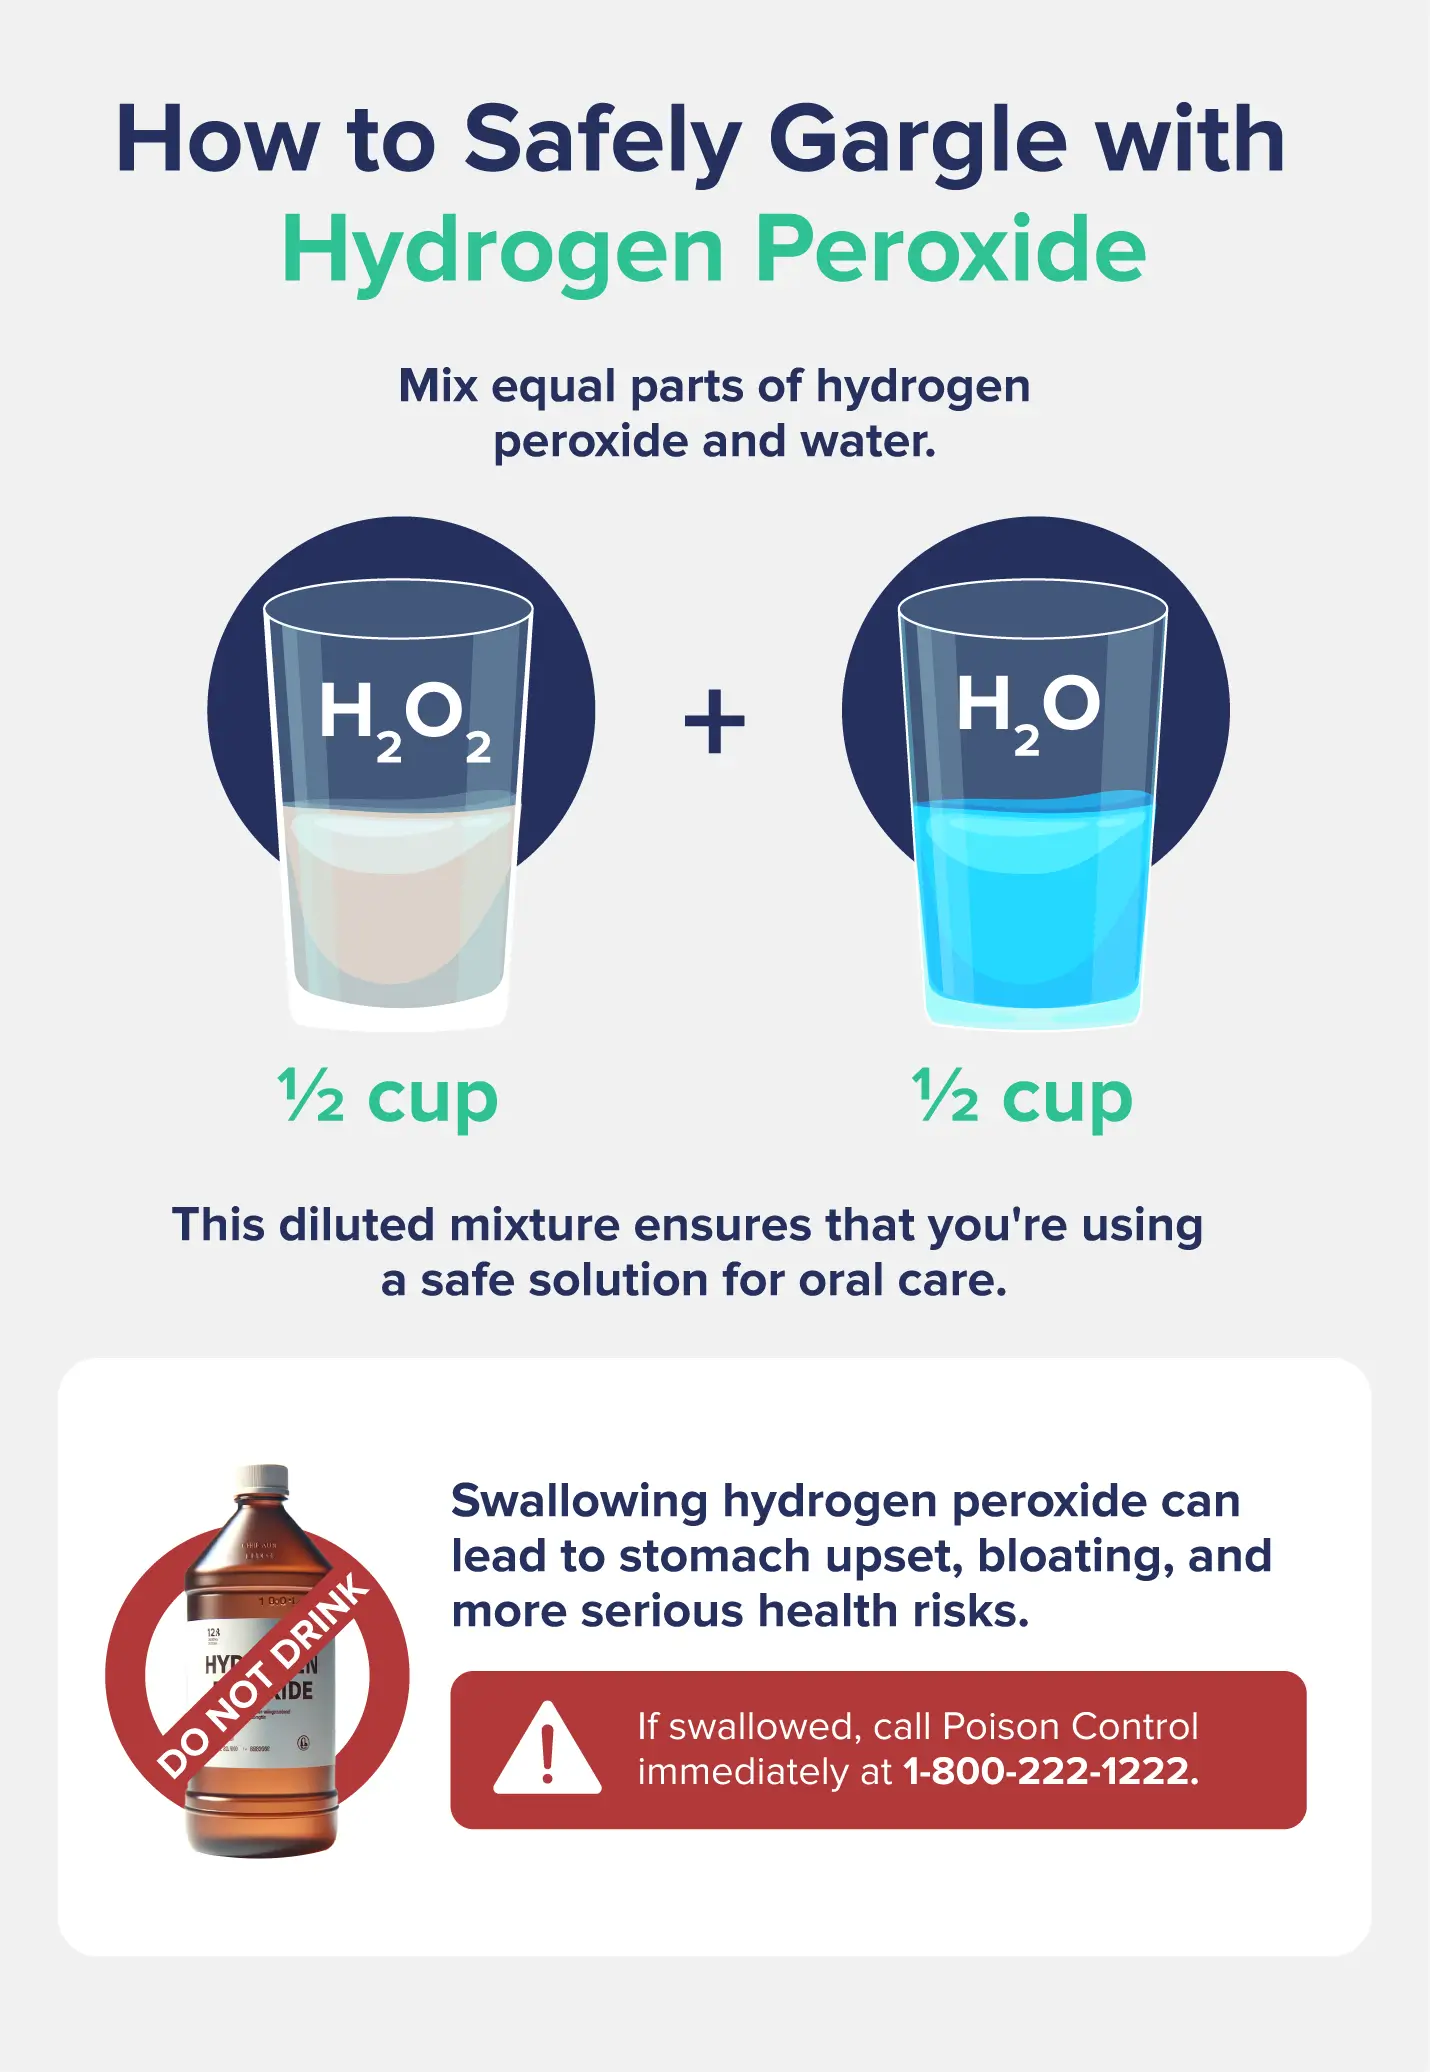 How to Safely Use Hydrogen Peroxide